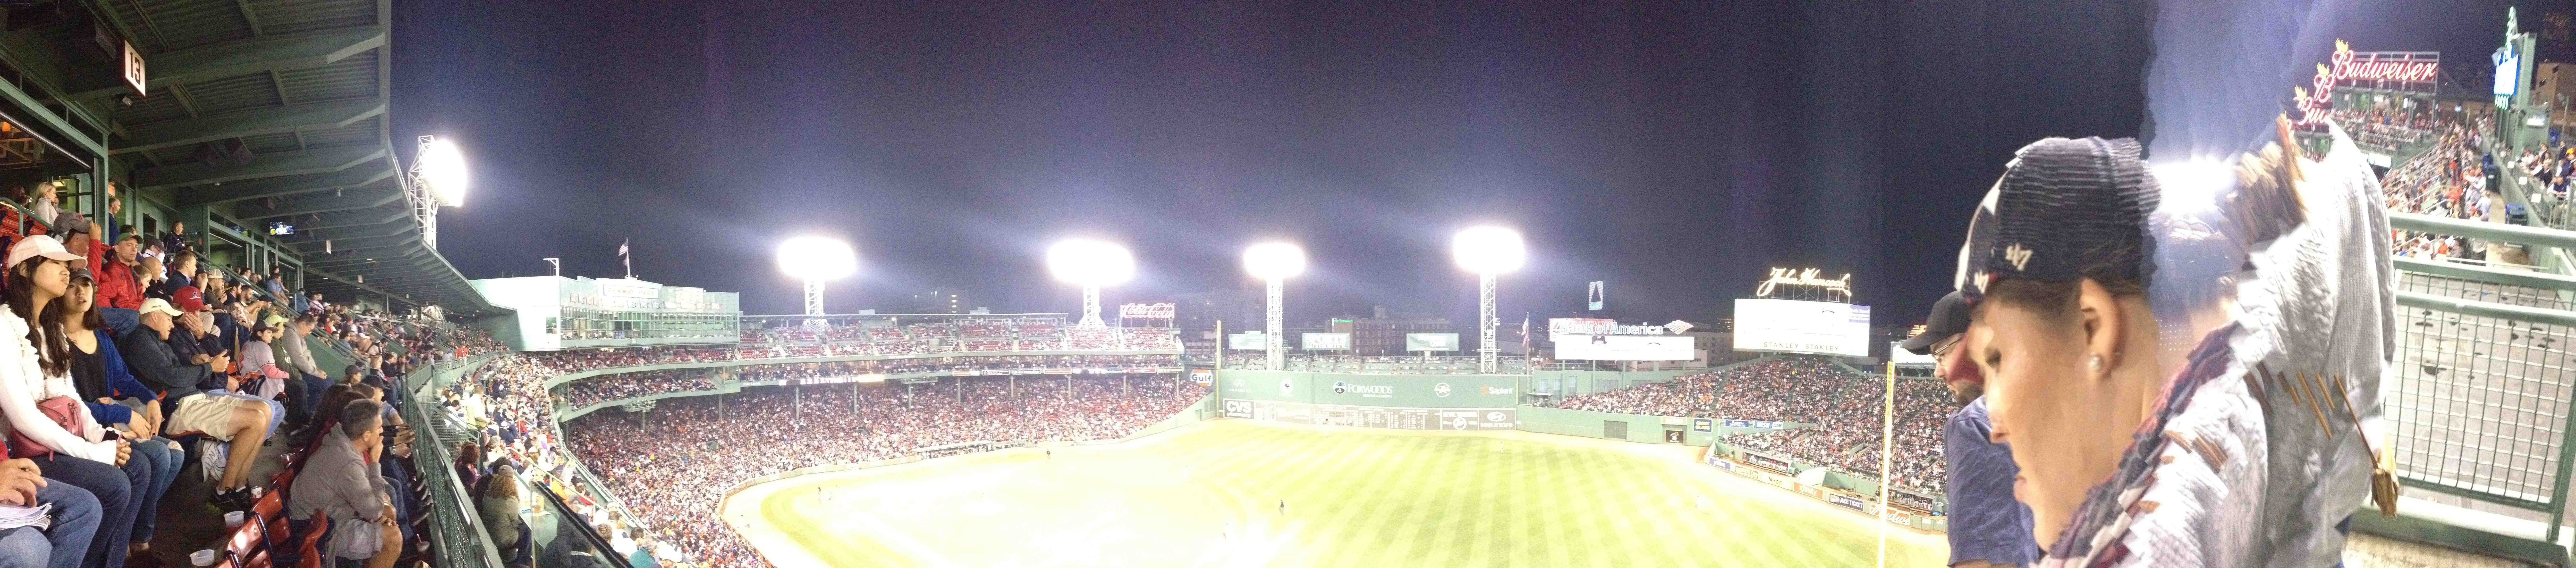 The American Way @ Red Sox Baseball Game